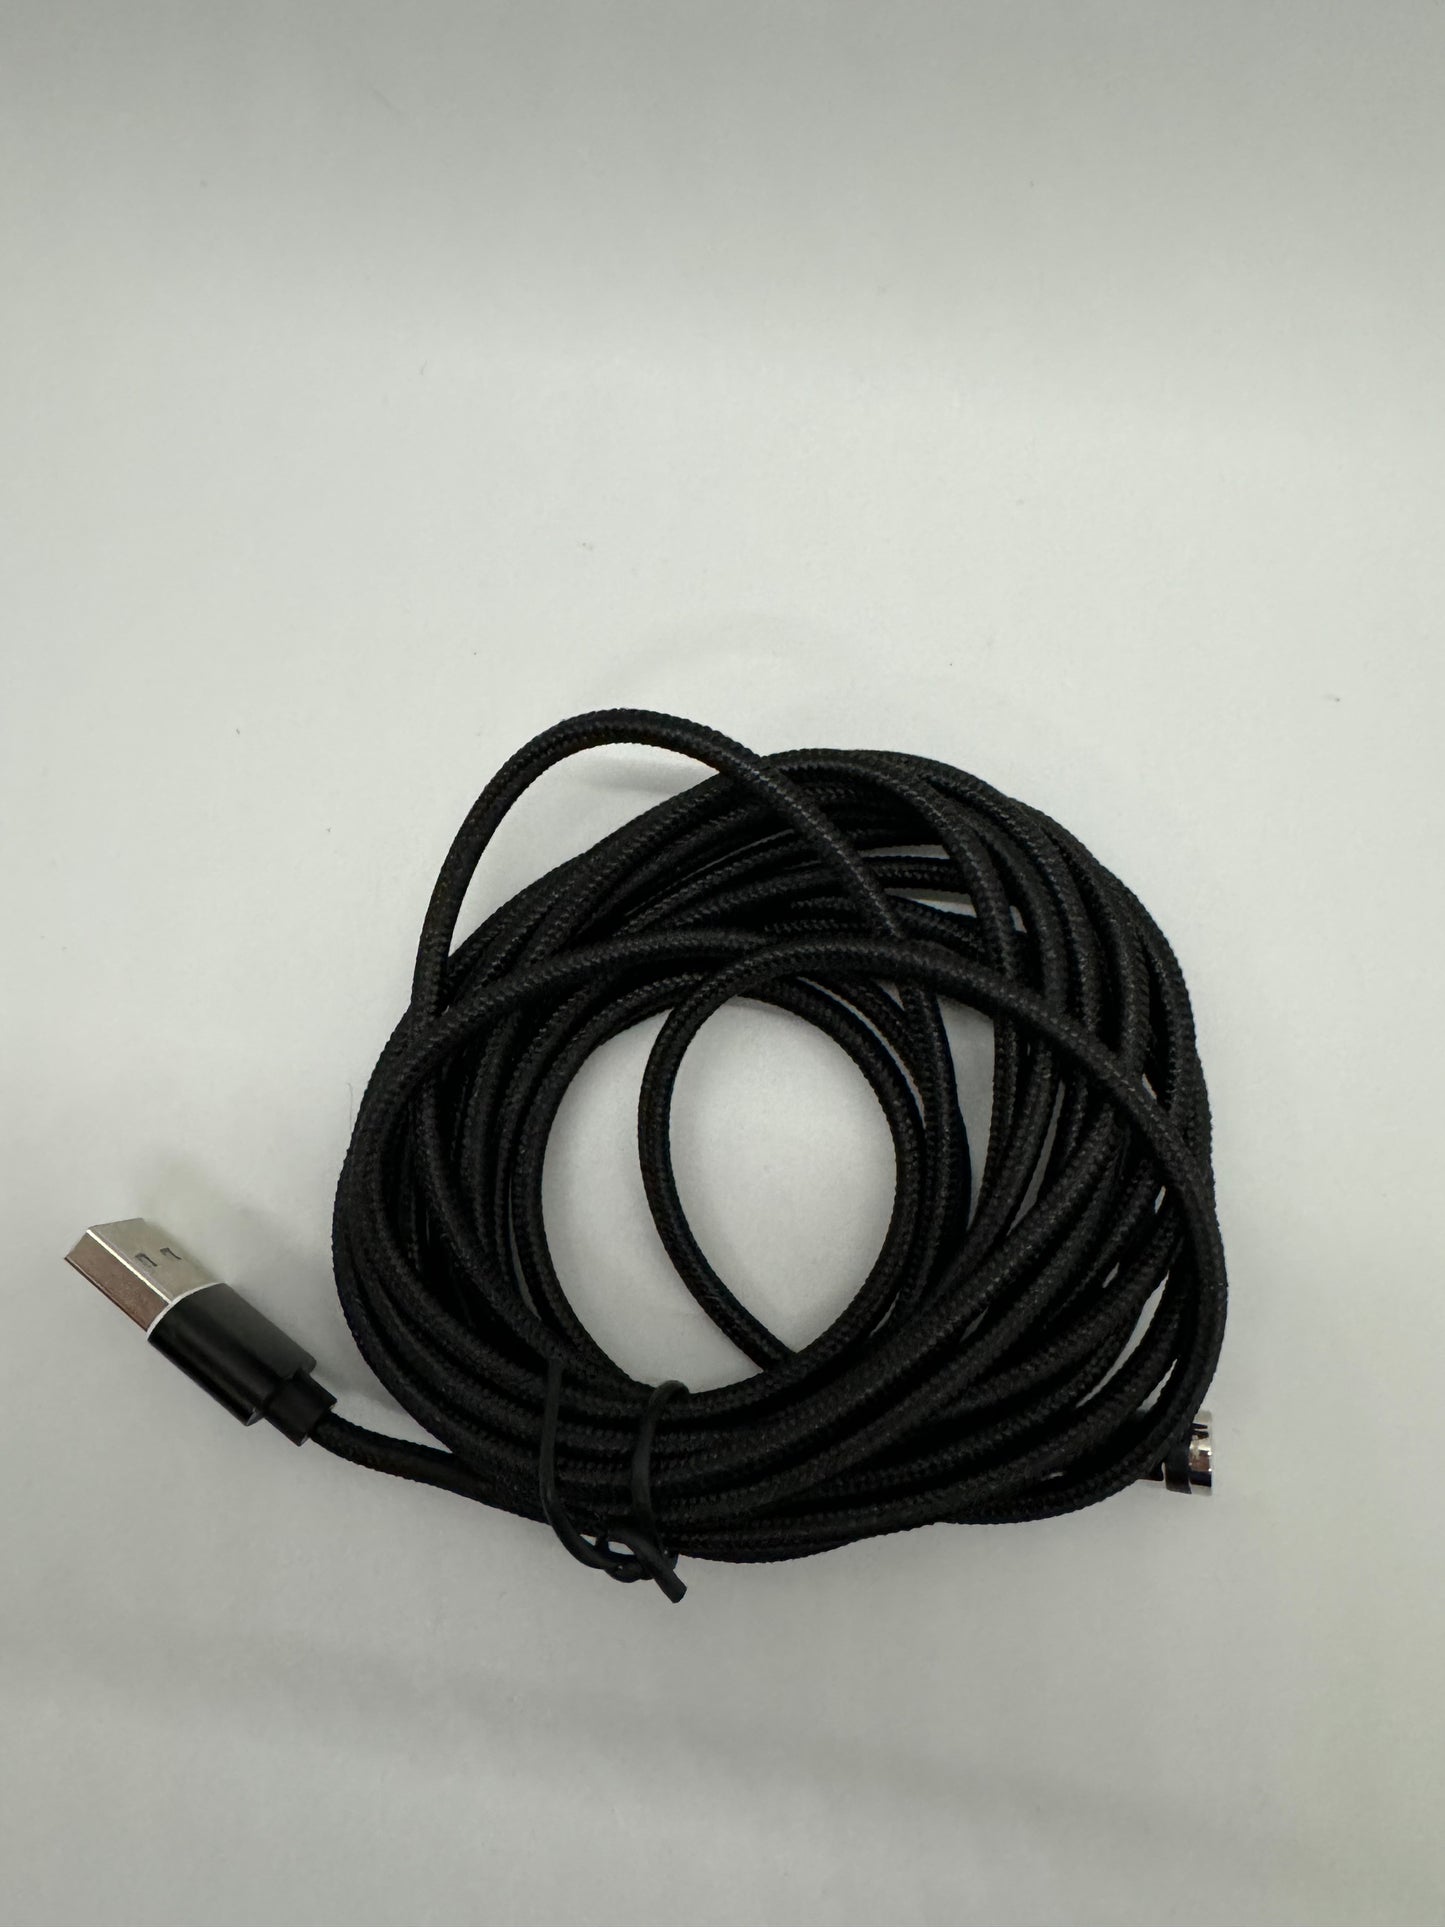 Extra Cables for our Magnetic Cable Kit